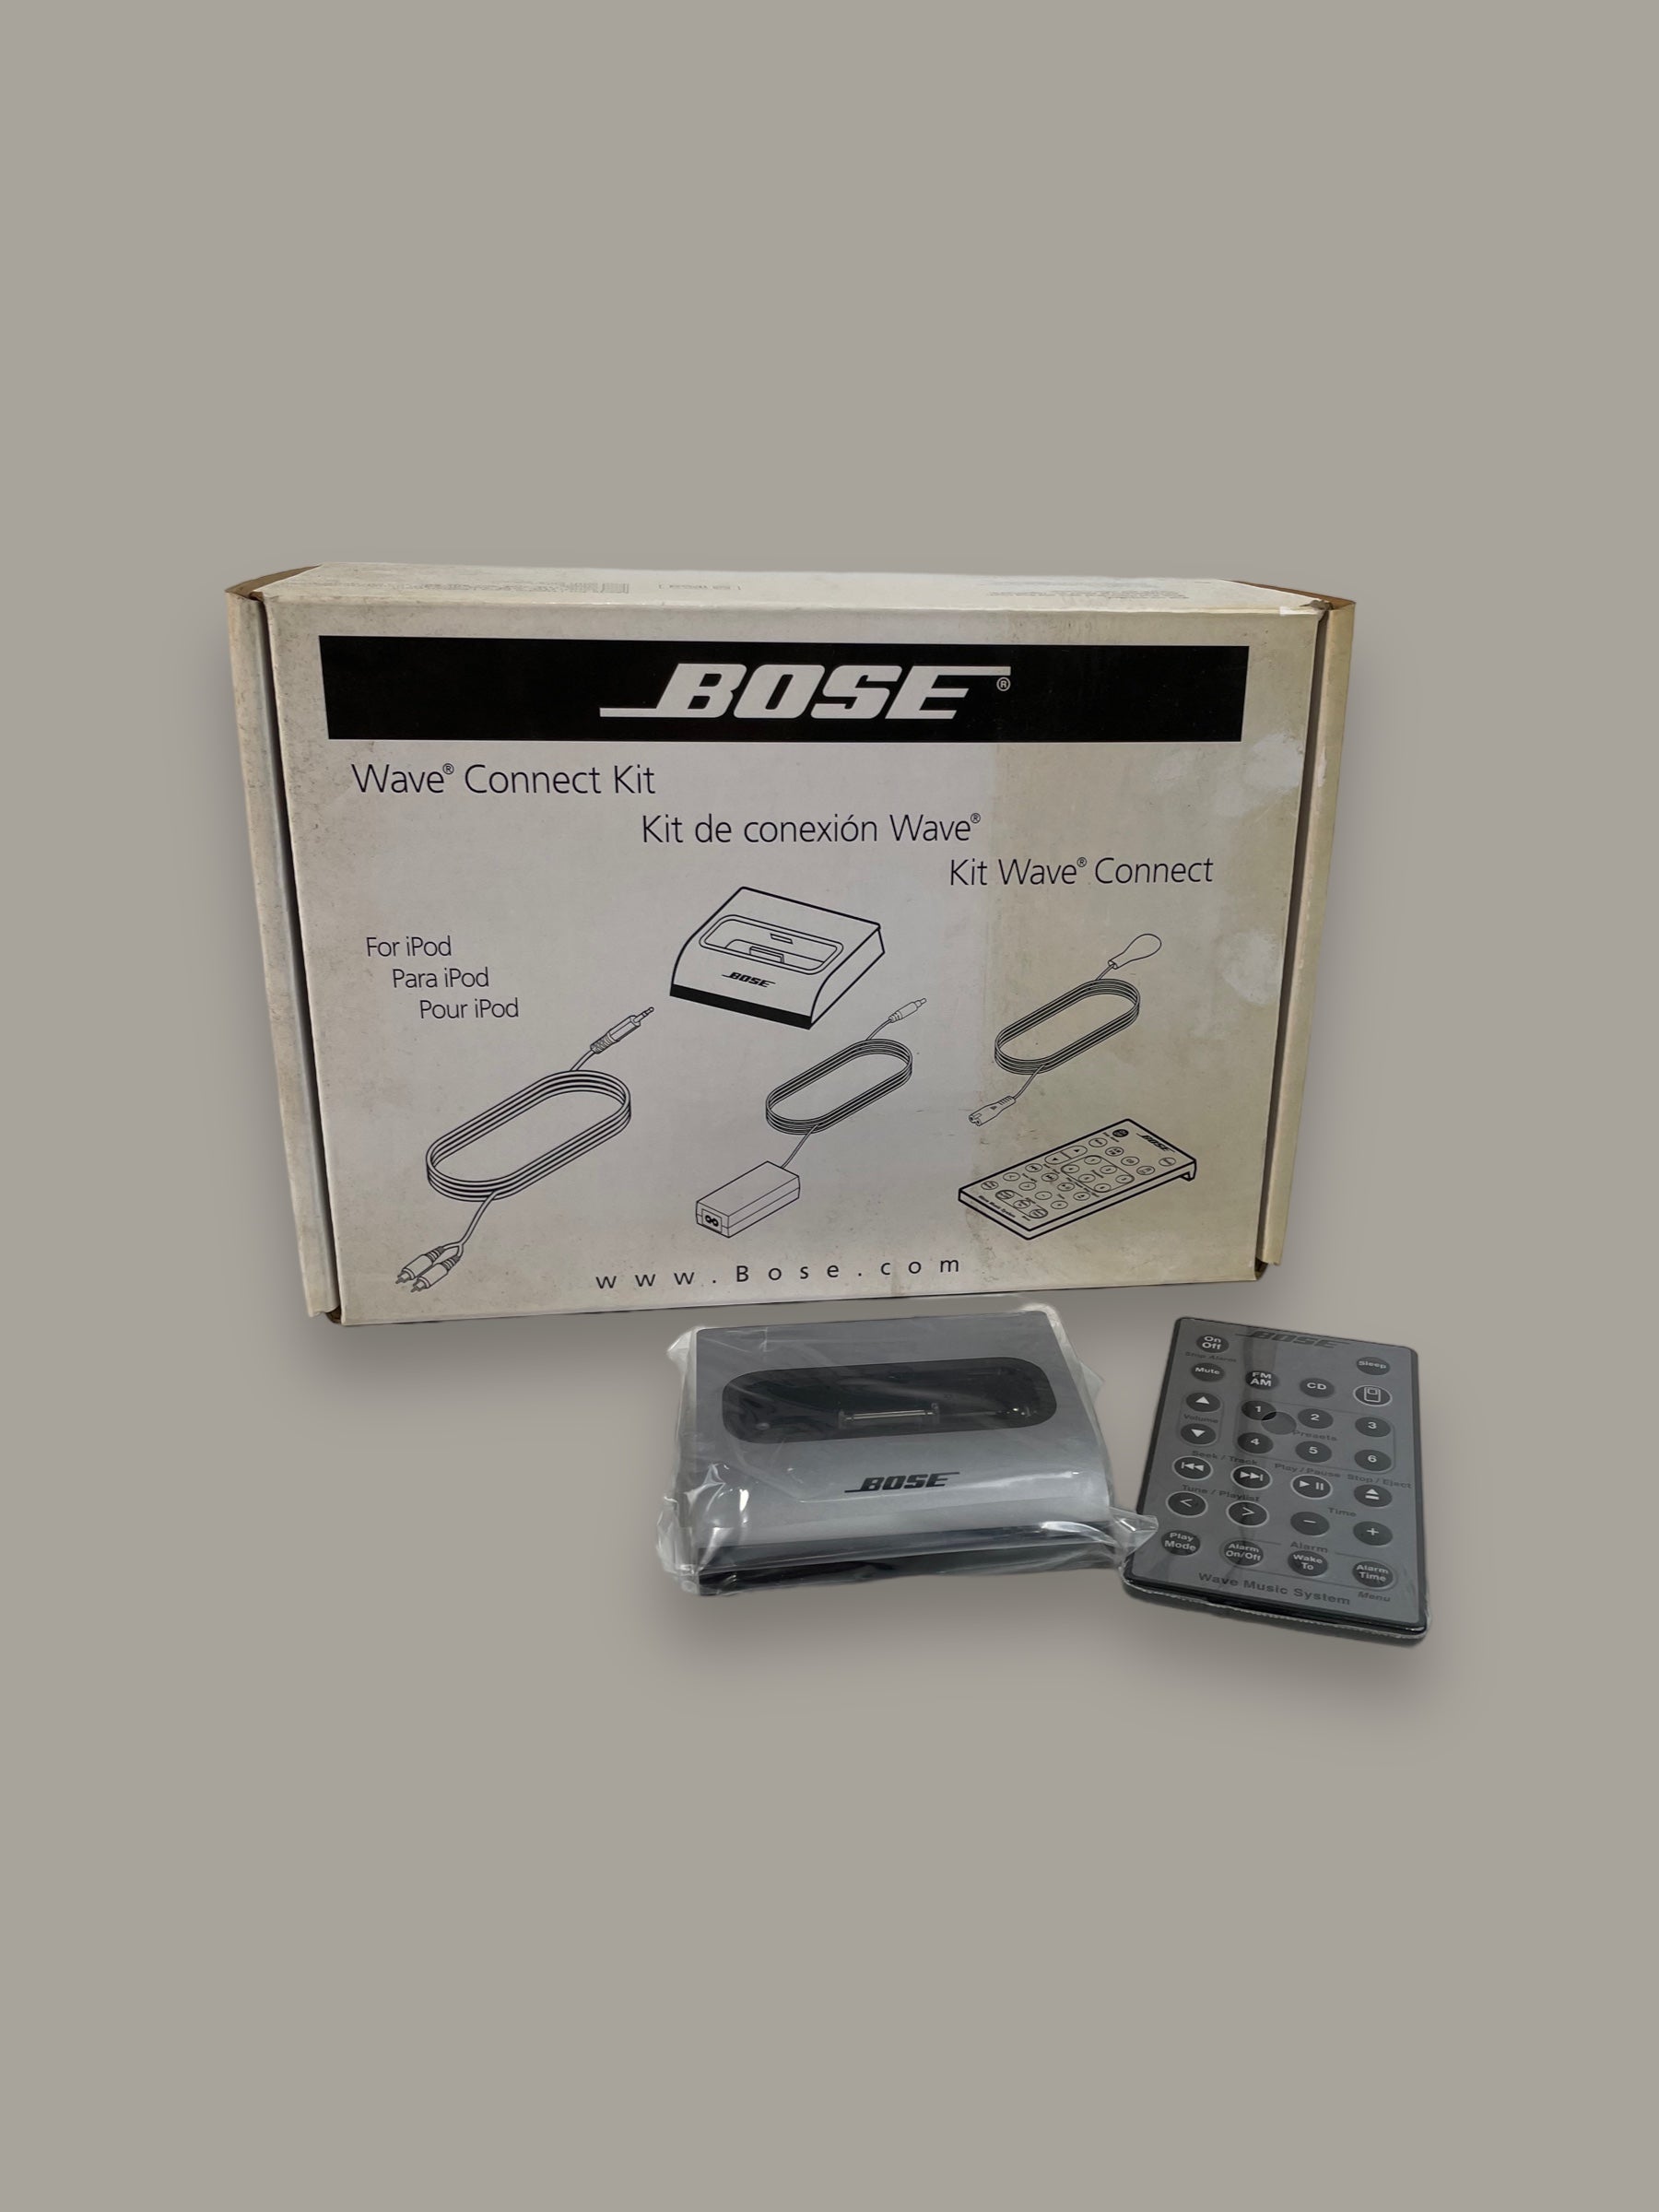 Bose Wave Connect Kit for iPod - New